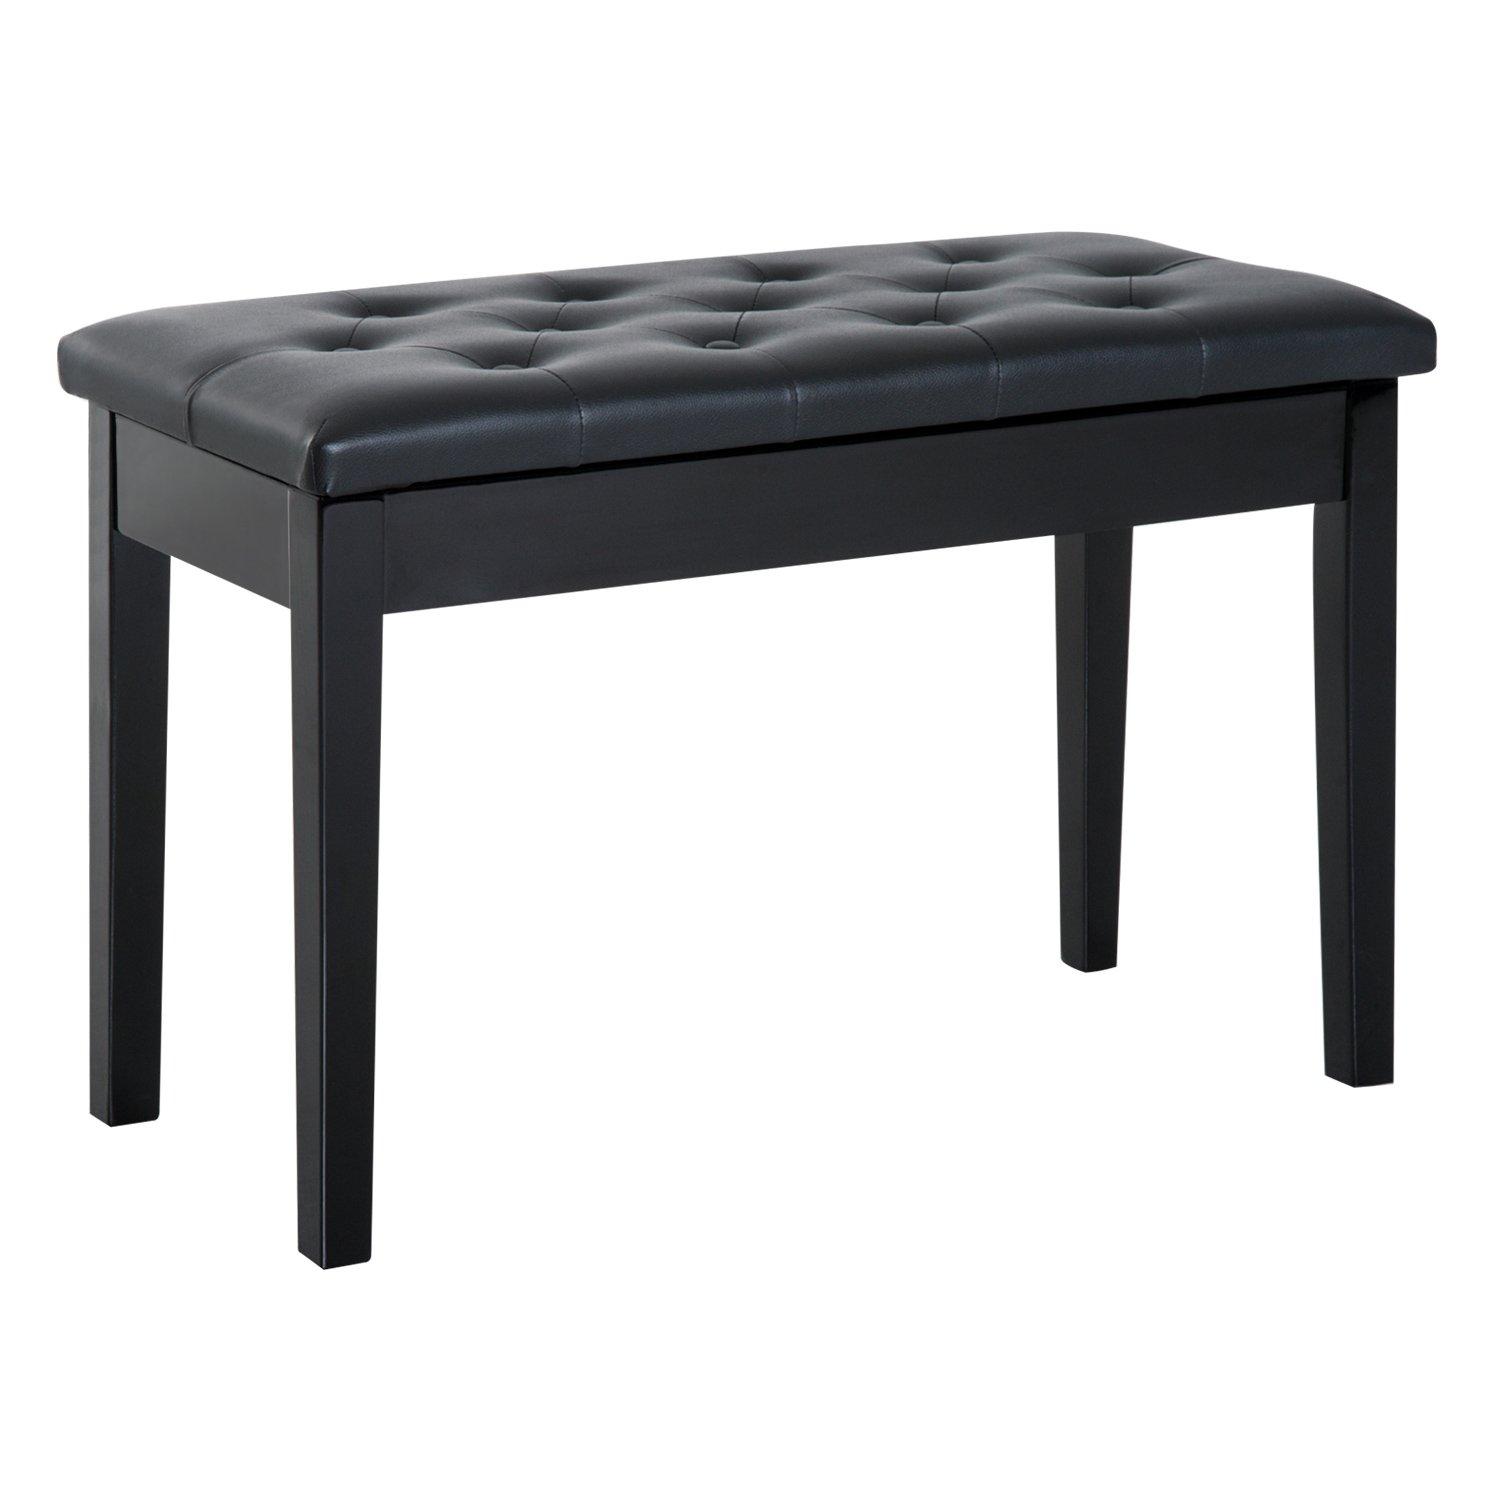 Classic Digital Keyboard Piano Bench Makeup Padded Seat Stool Solid Wood Black